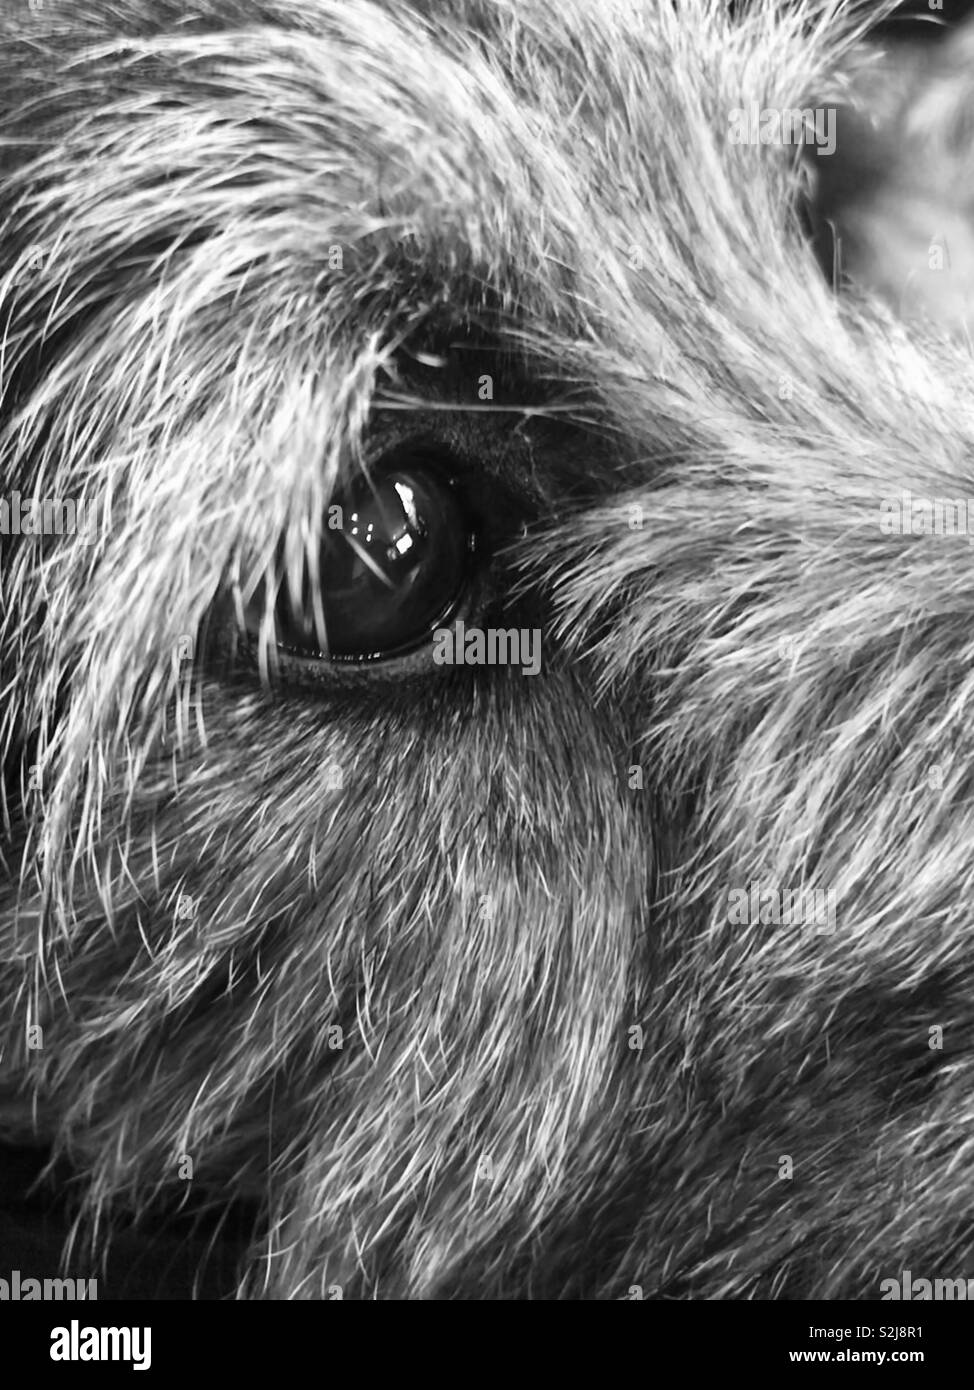 Dog’s eye and face in black and white. March 2019. Stock Photo